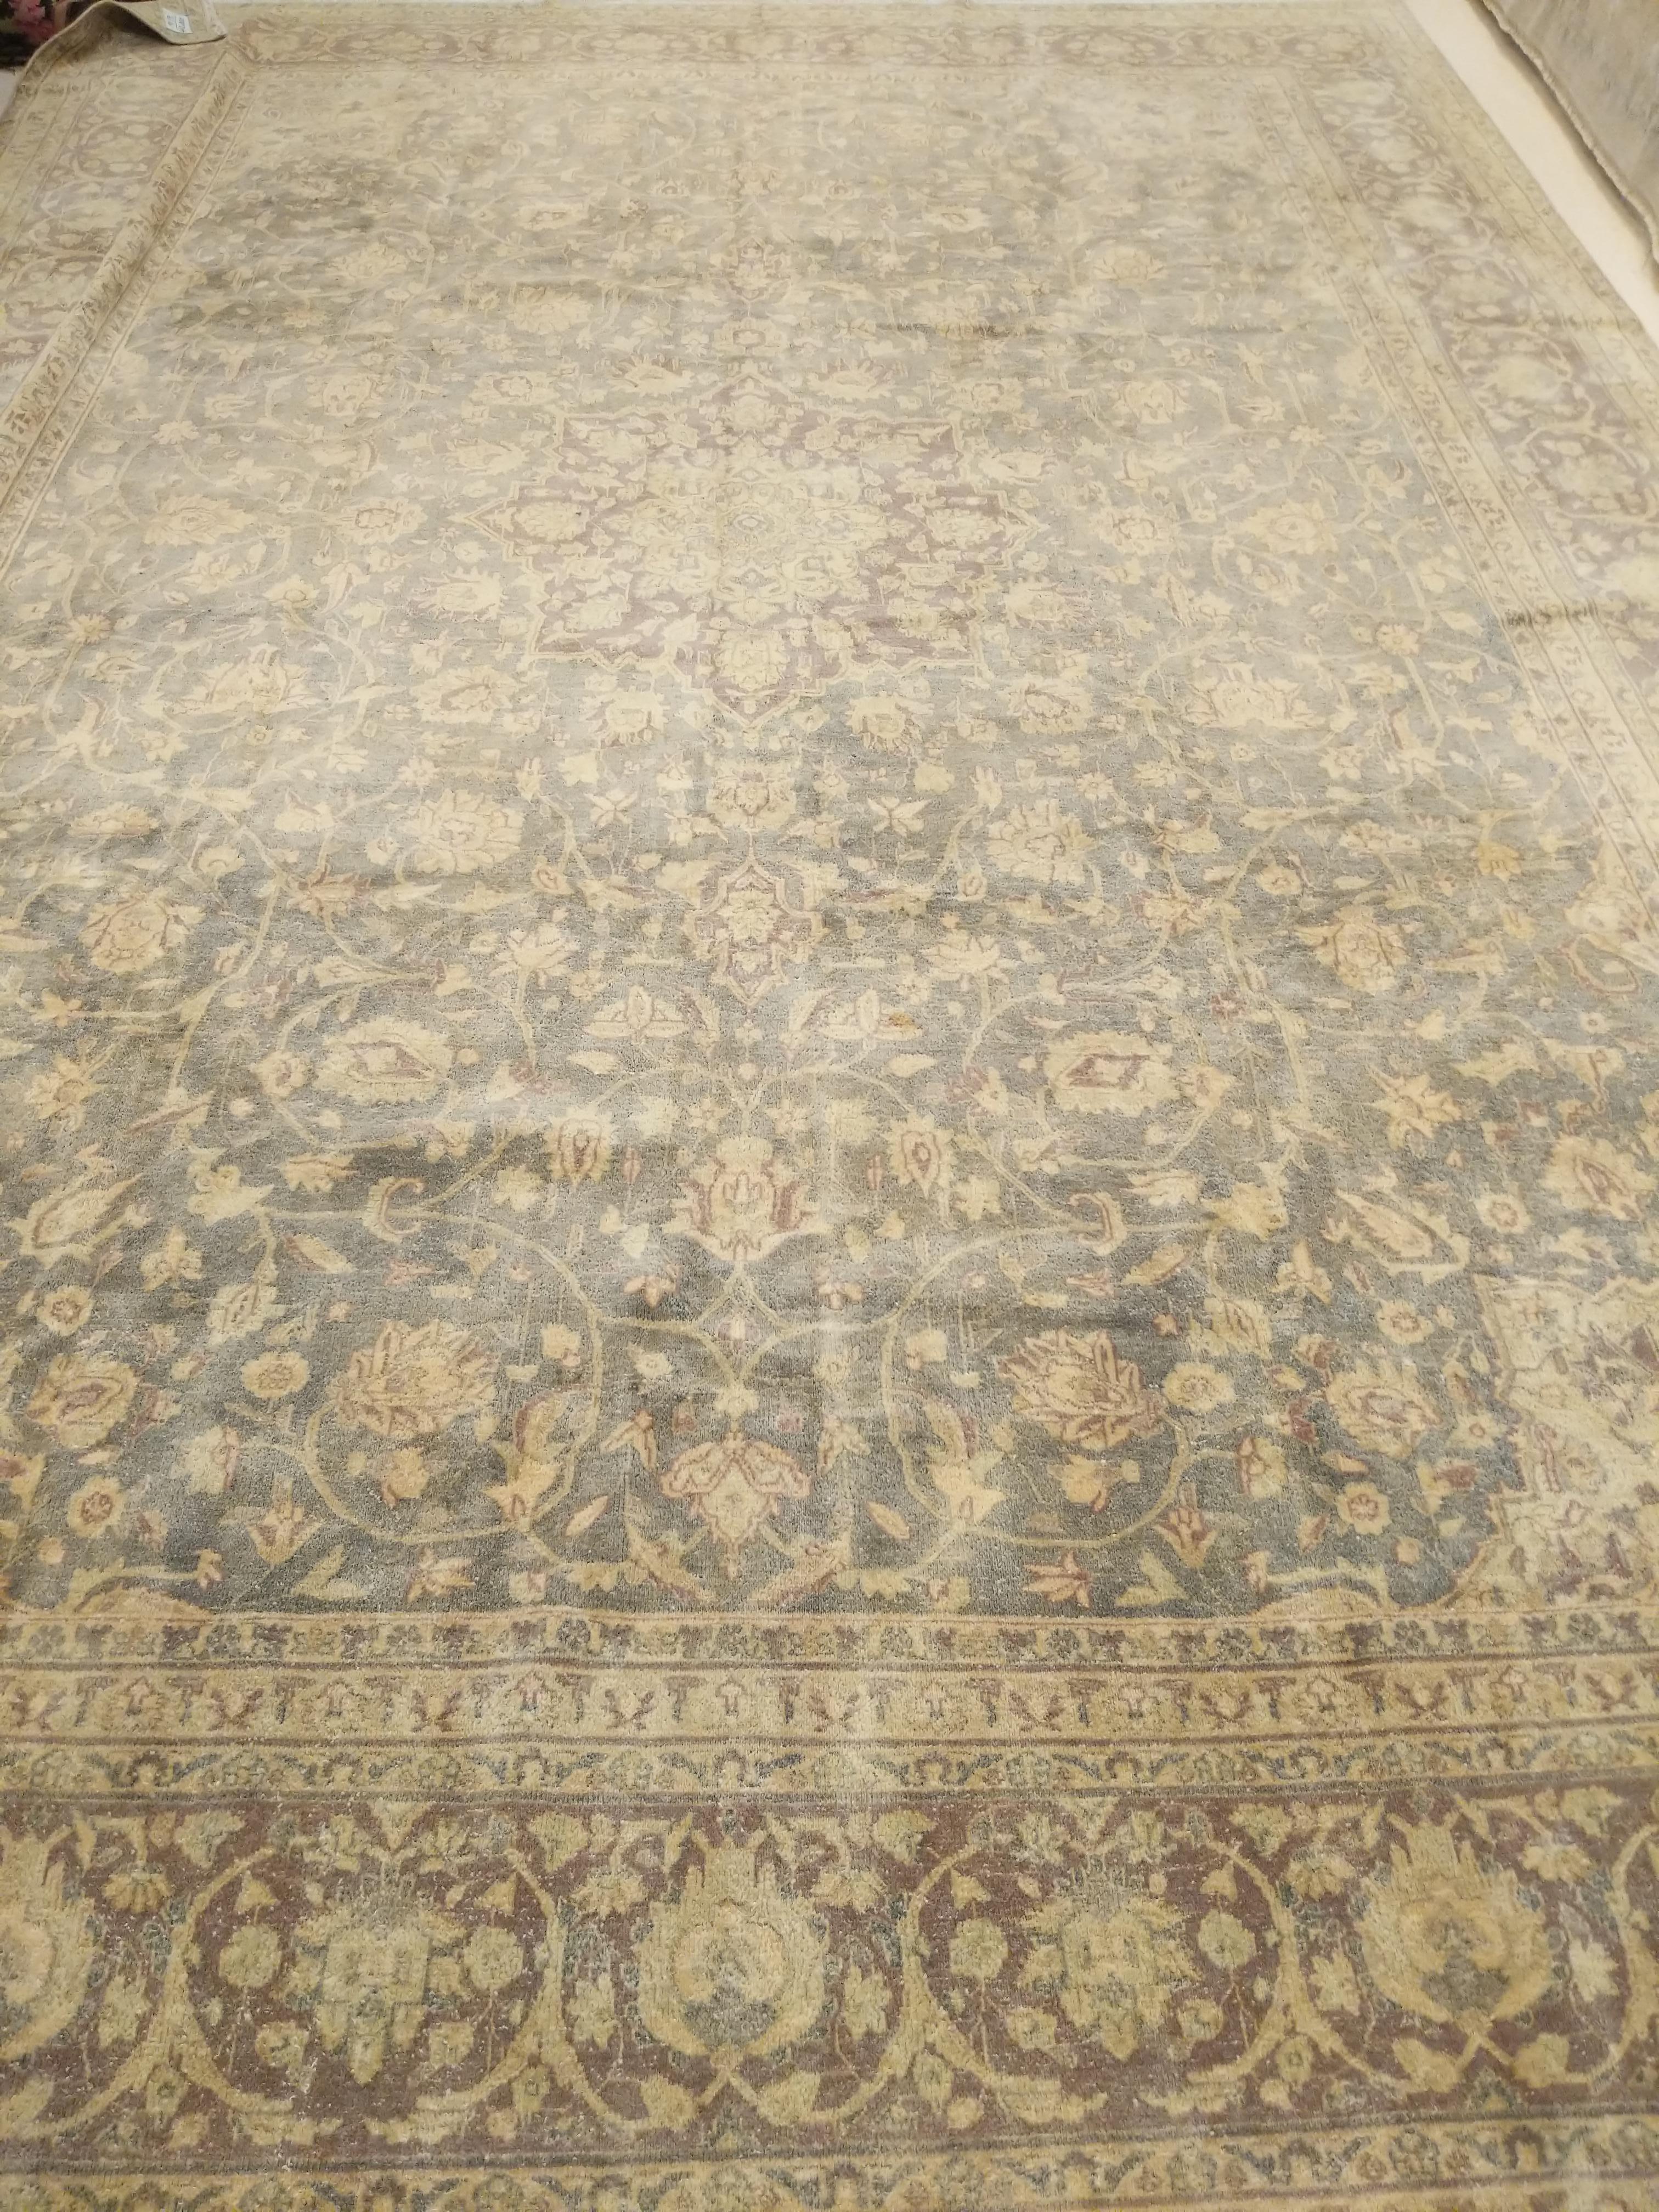 A highly refined and sophisticated Sivas carpet, distinguished by an elegant teal color and framed by an arabesque border floating on a soft aubergine background. The delicately drawn small medallion is somewhat concealed in the field by the soft